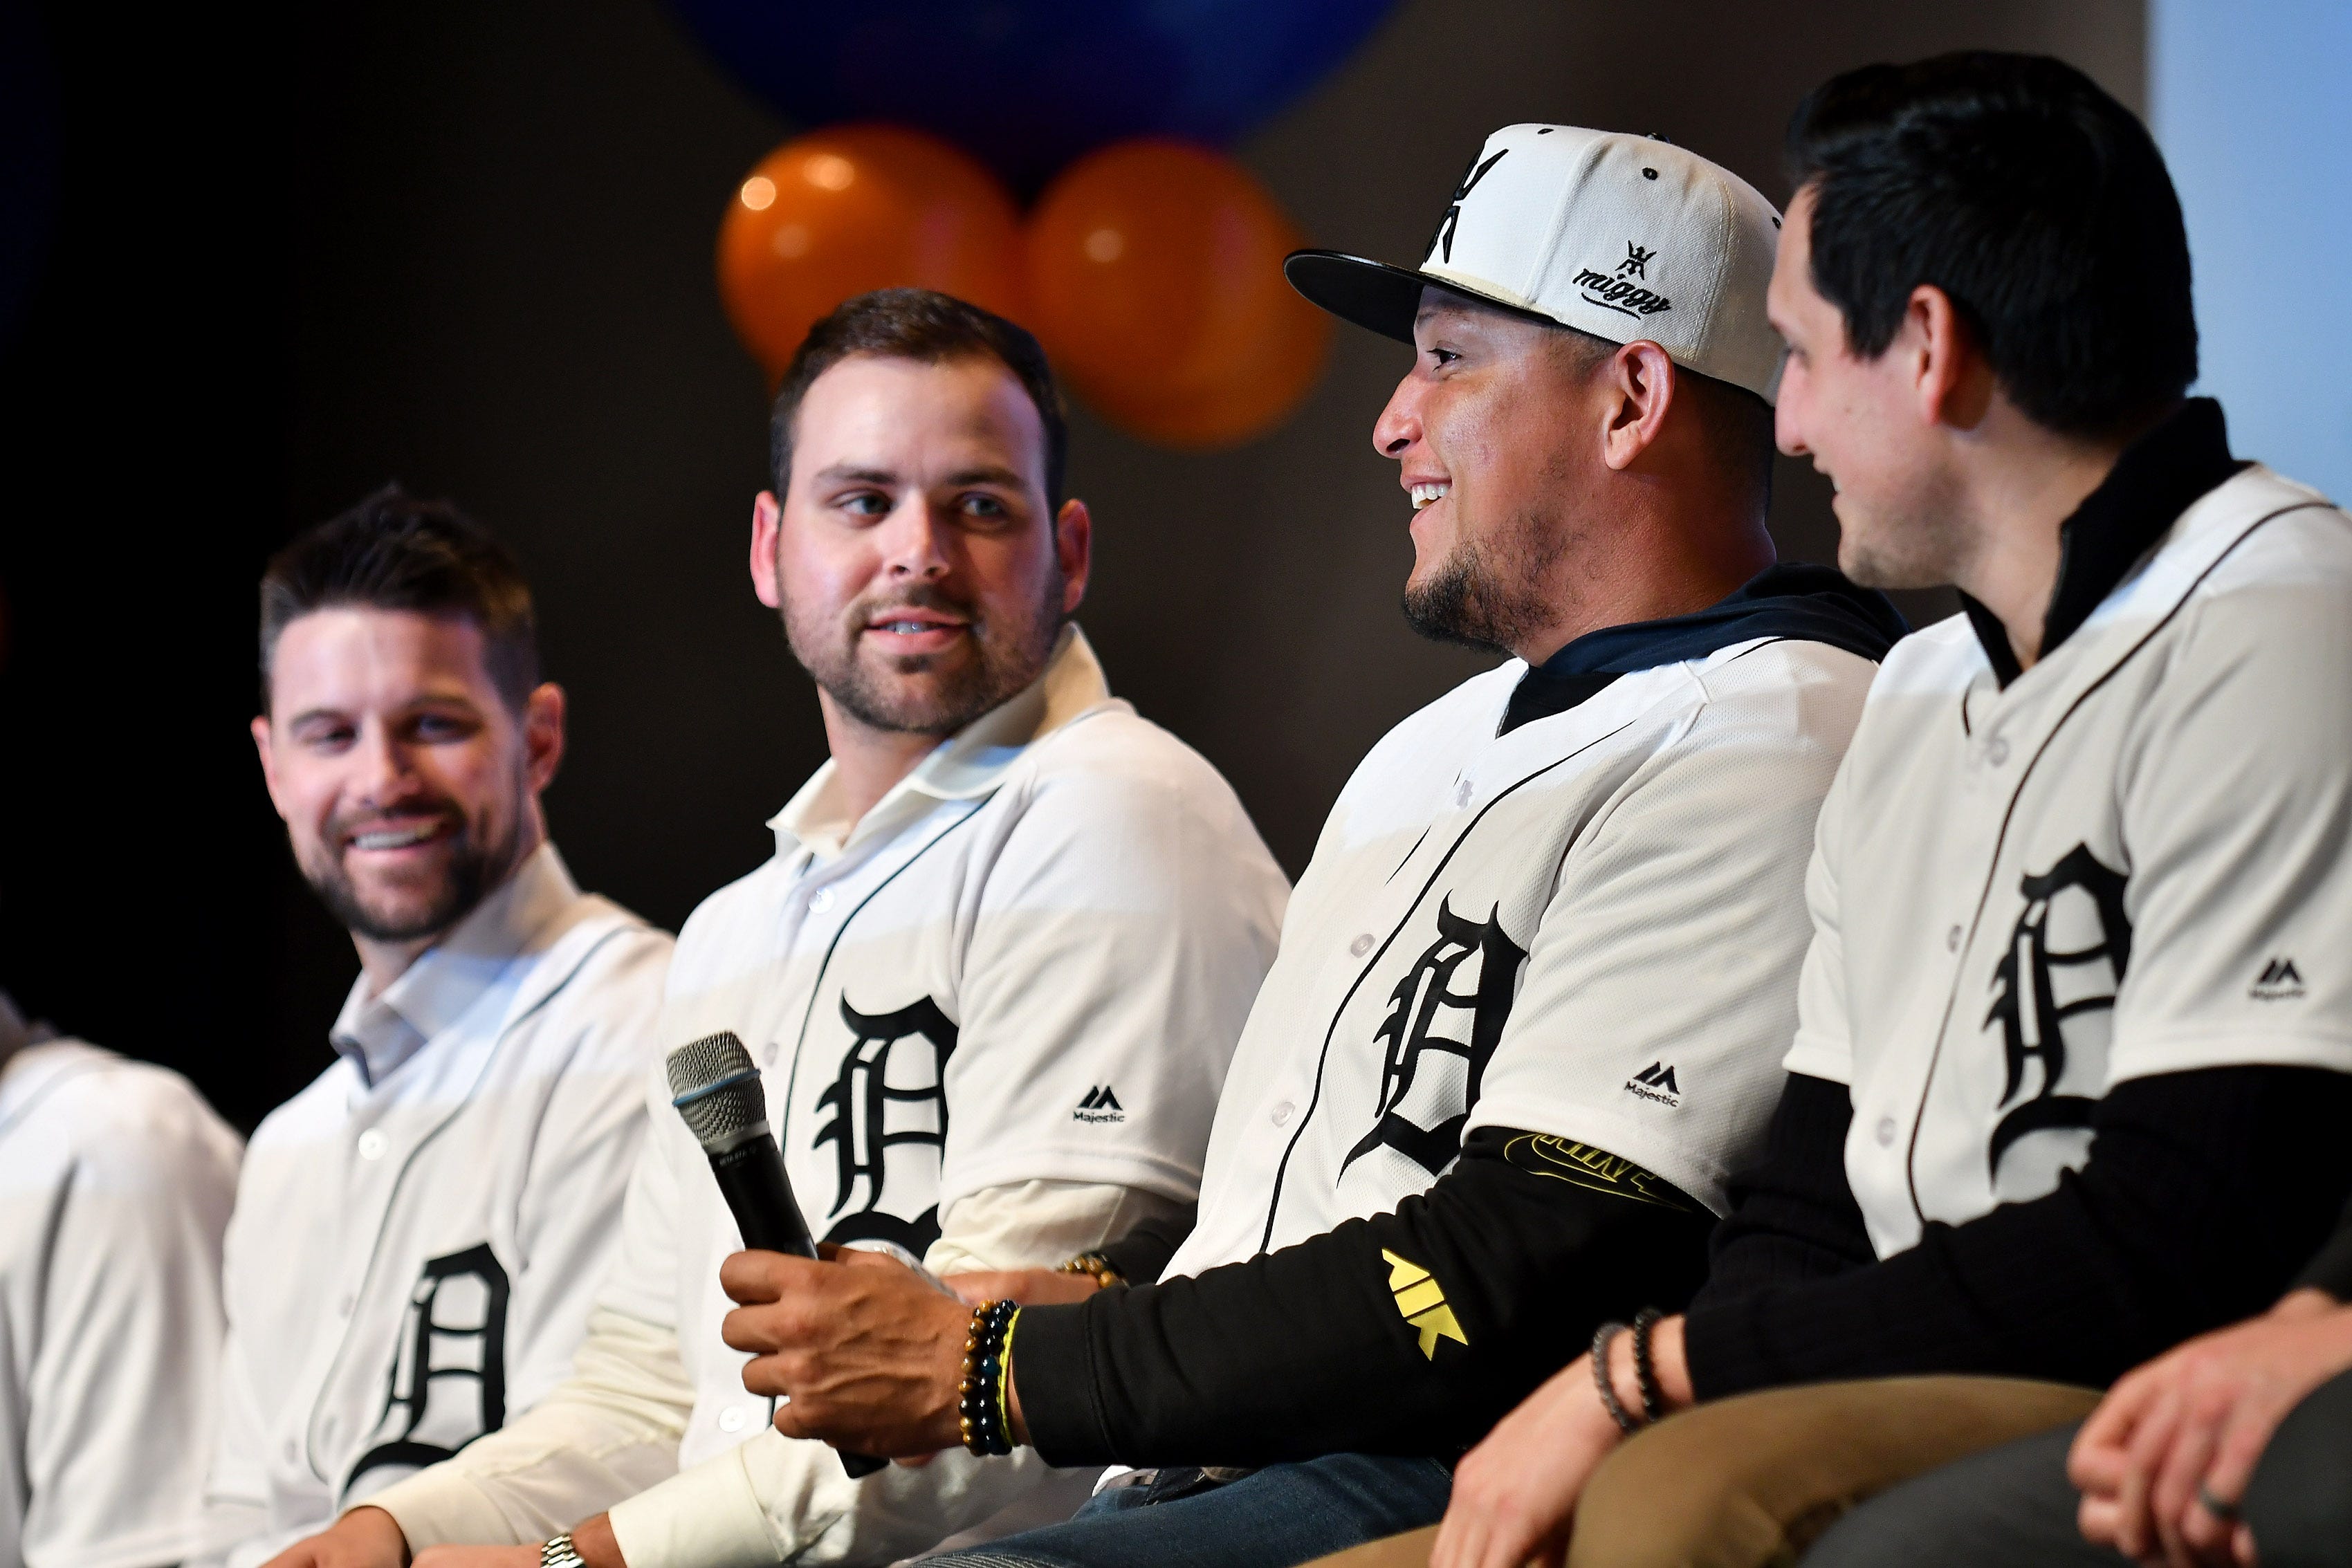 Tigers' Michael Fulmer, left, looks over while Miguel Cabrera smiles and pauses while answering a question as to how many home runs he has hit in his career (465) at a kids rally at Novi High School.